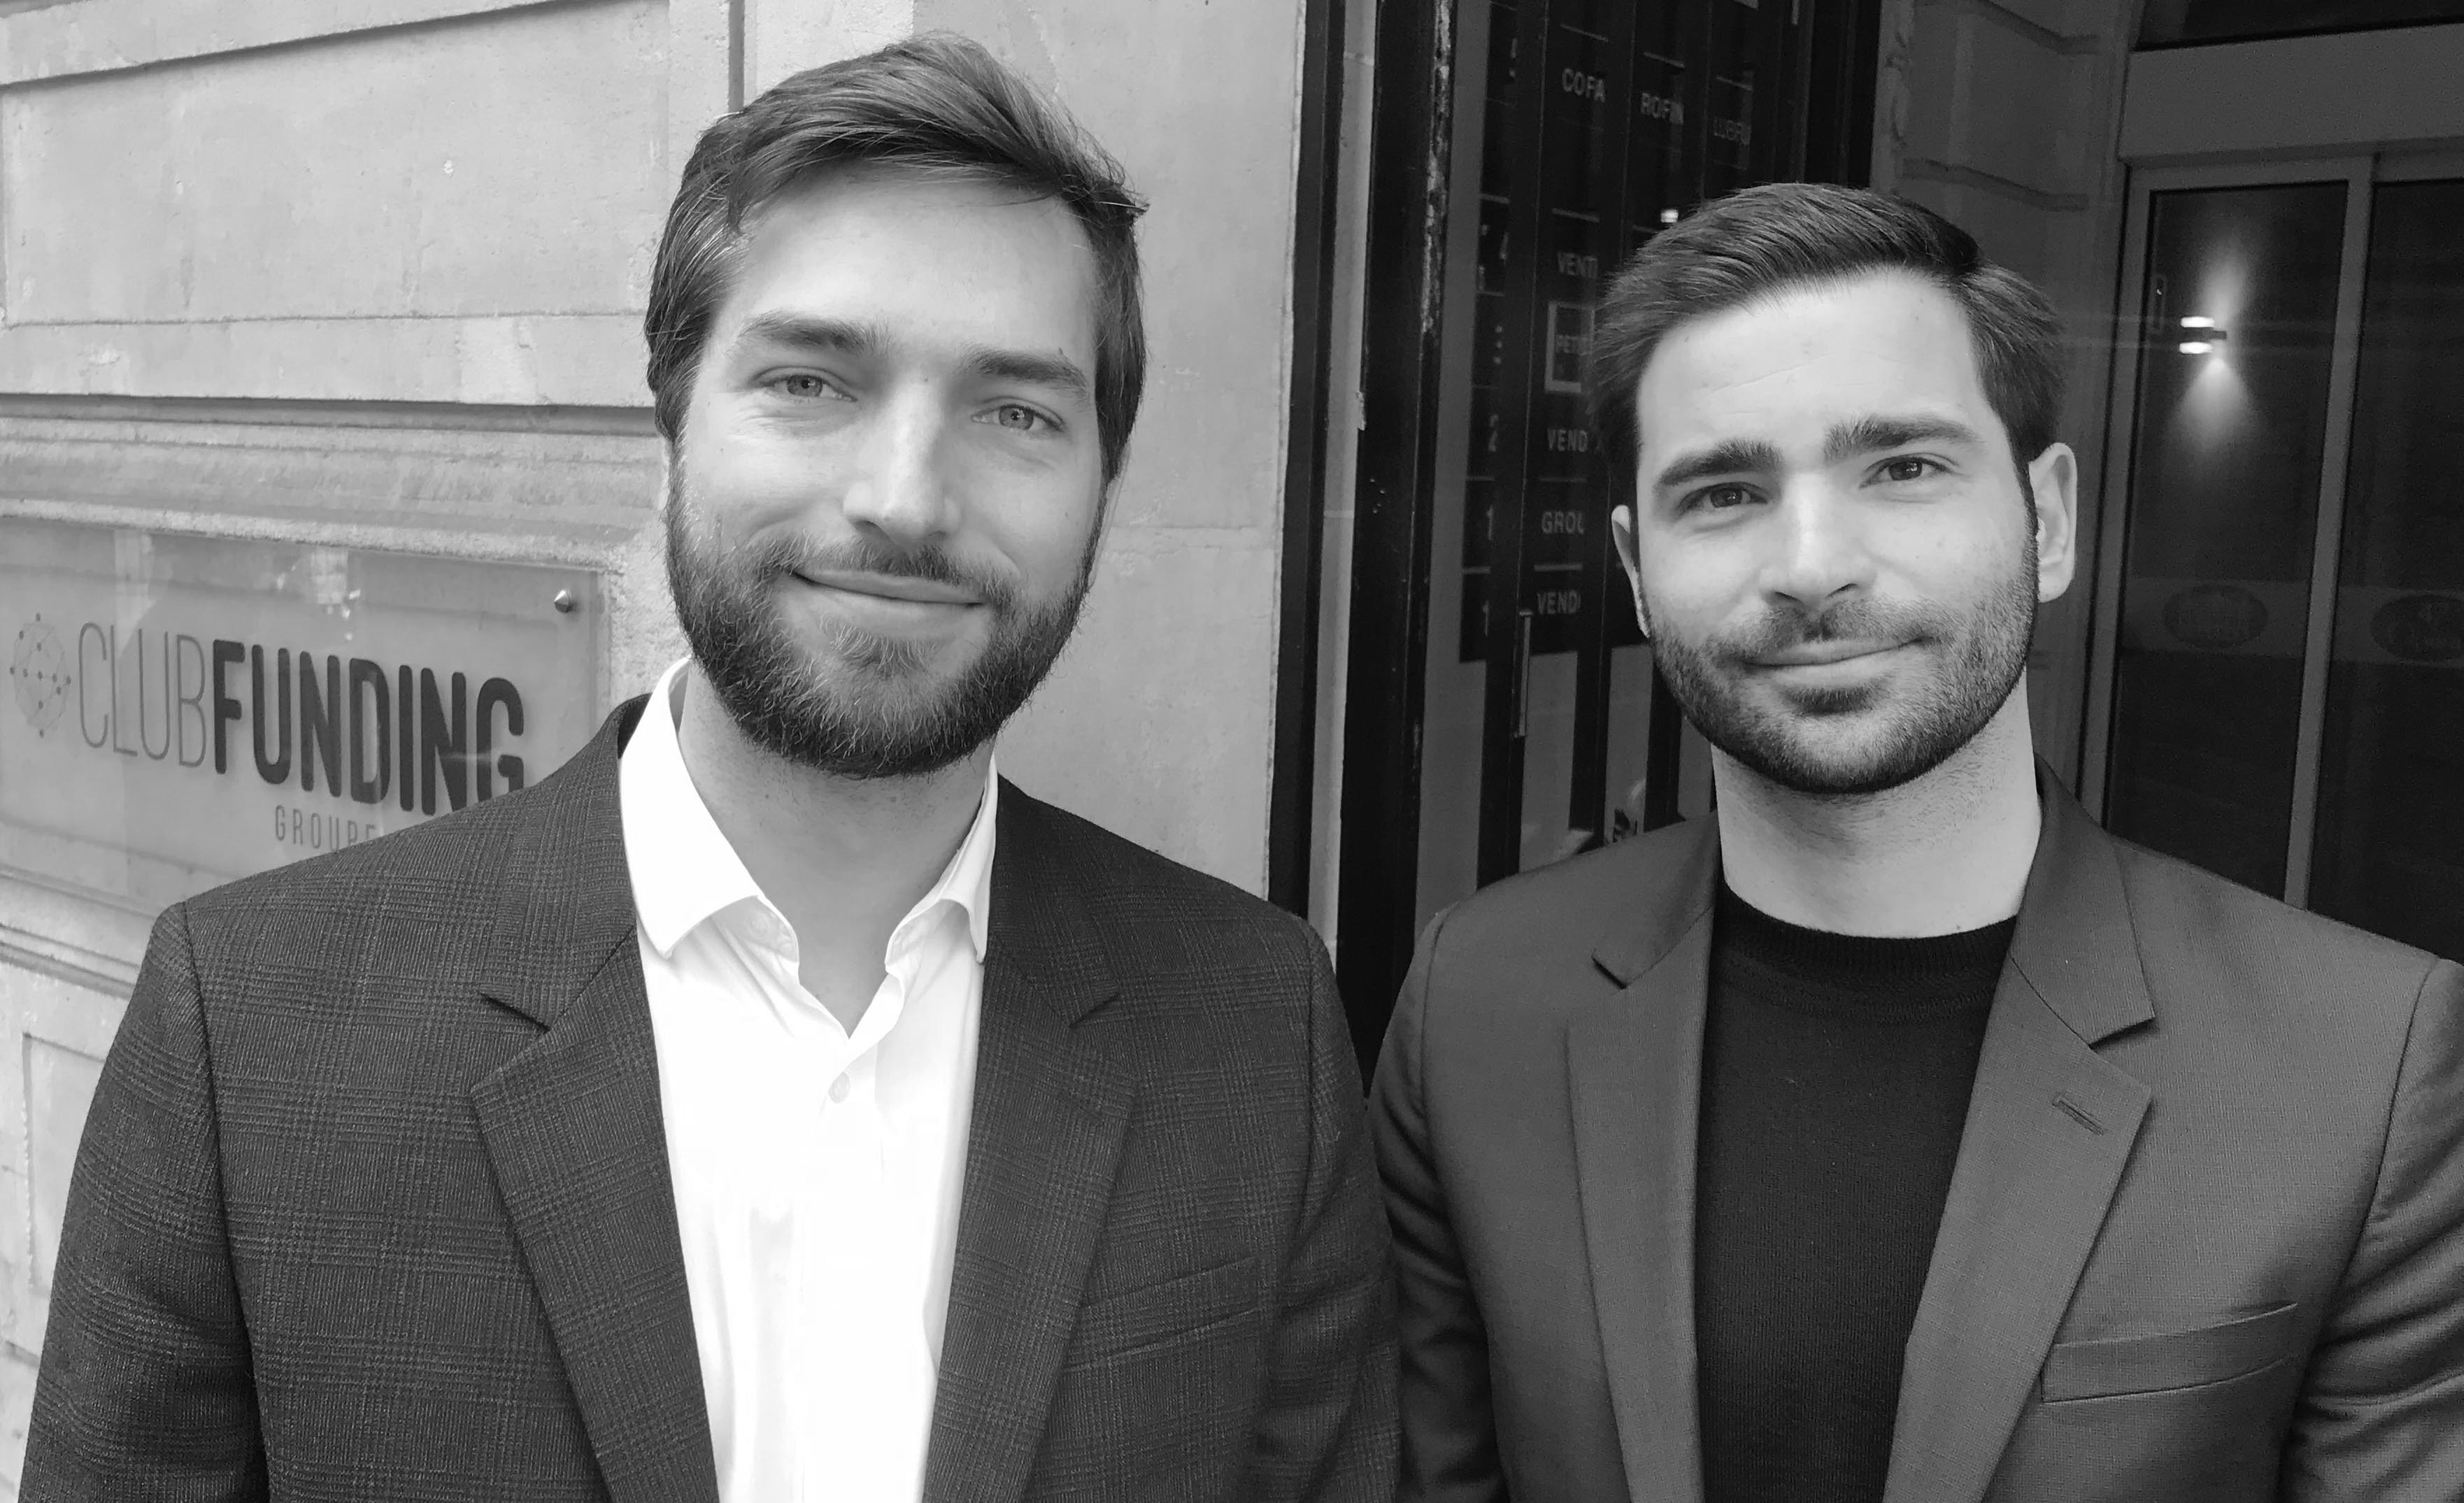 L’immobilier, grand gagnant du crowdfunding